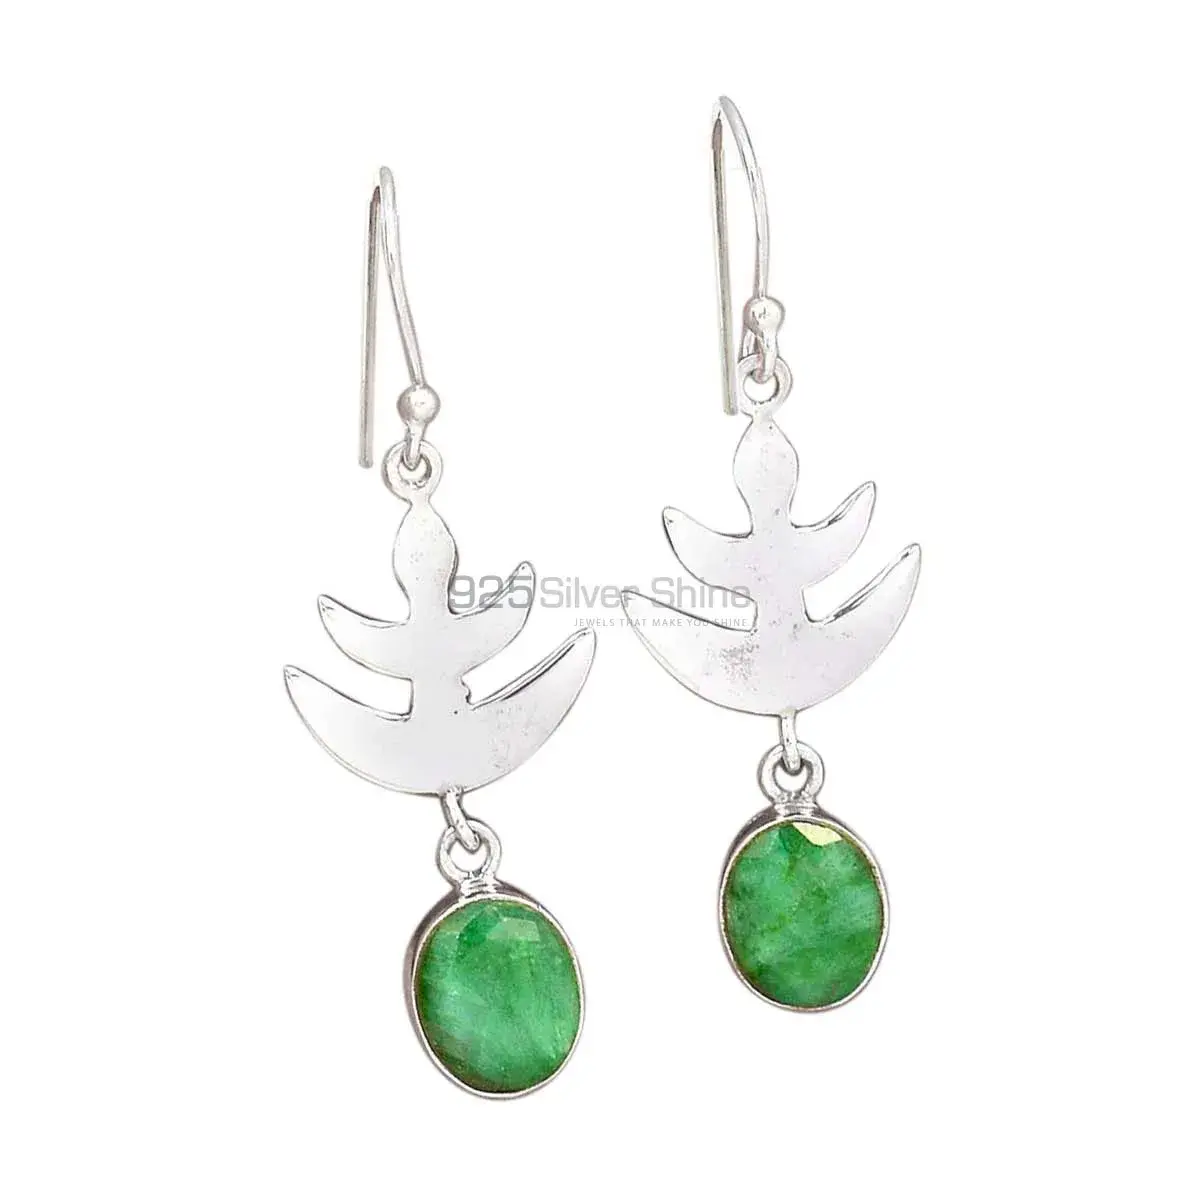 Solid 925 Silver Earrings In Natural Dyed Emerald Gemstone 925SE2175